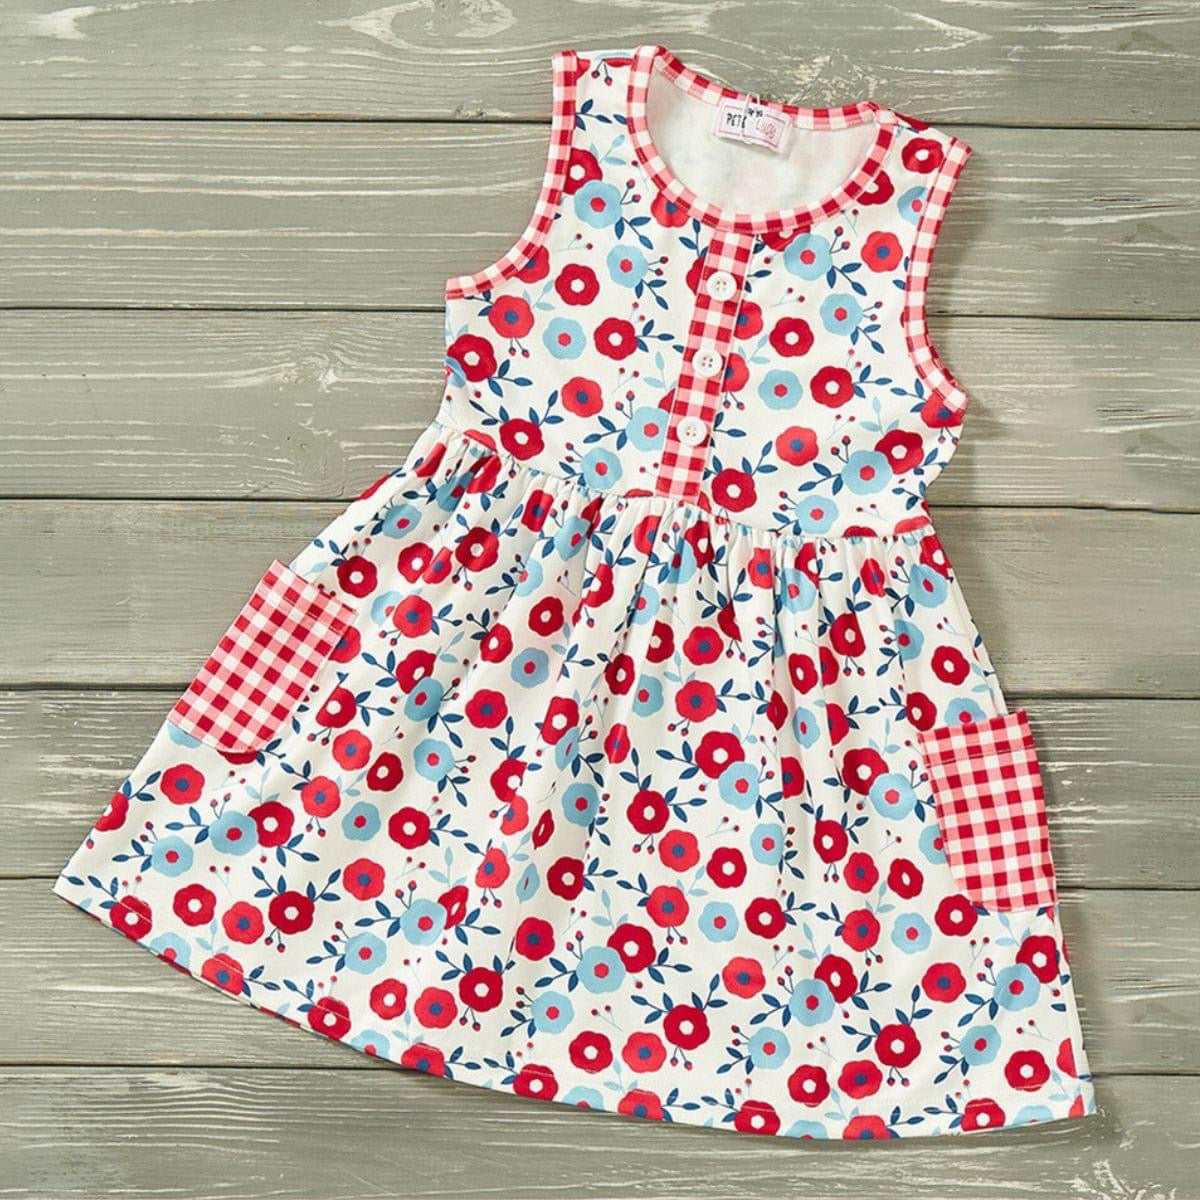 Pretty Patriotic Dress by Pete + Lucy